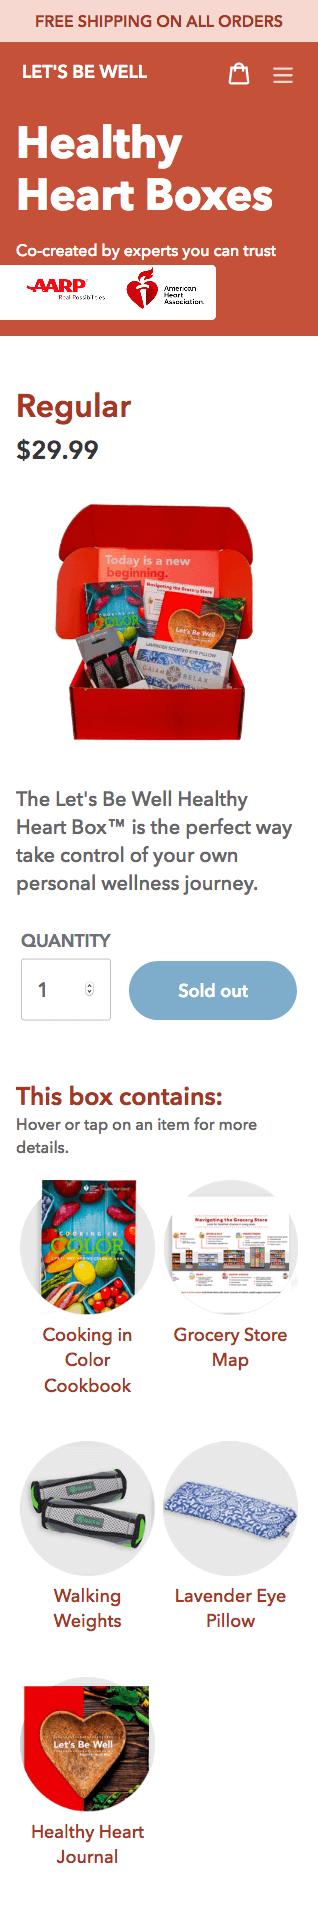 Let's Be Well Heart Box